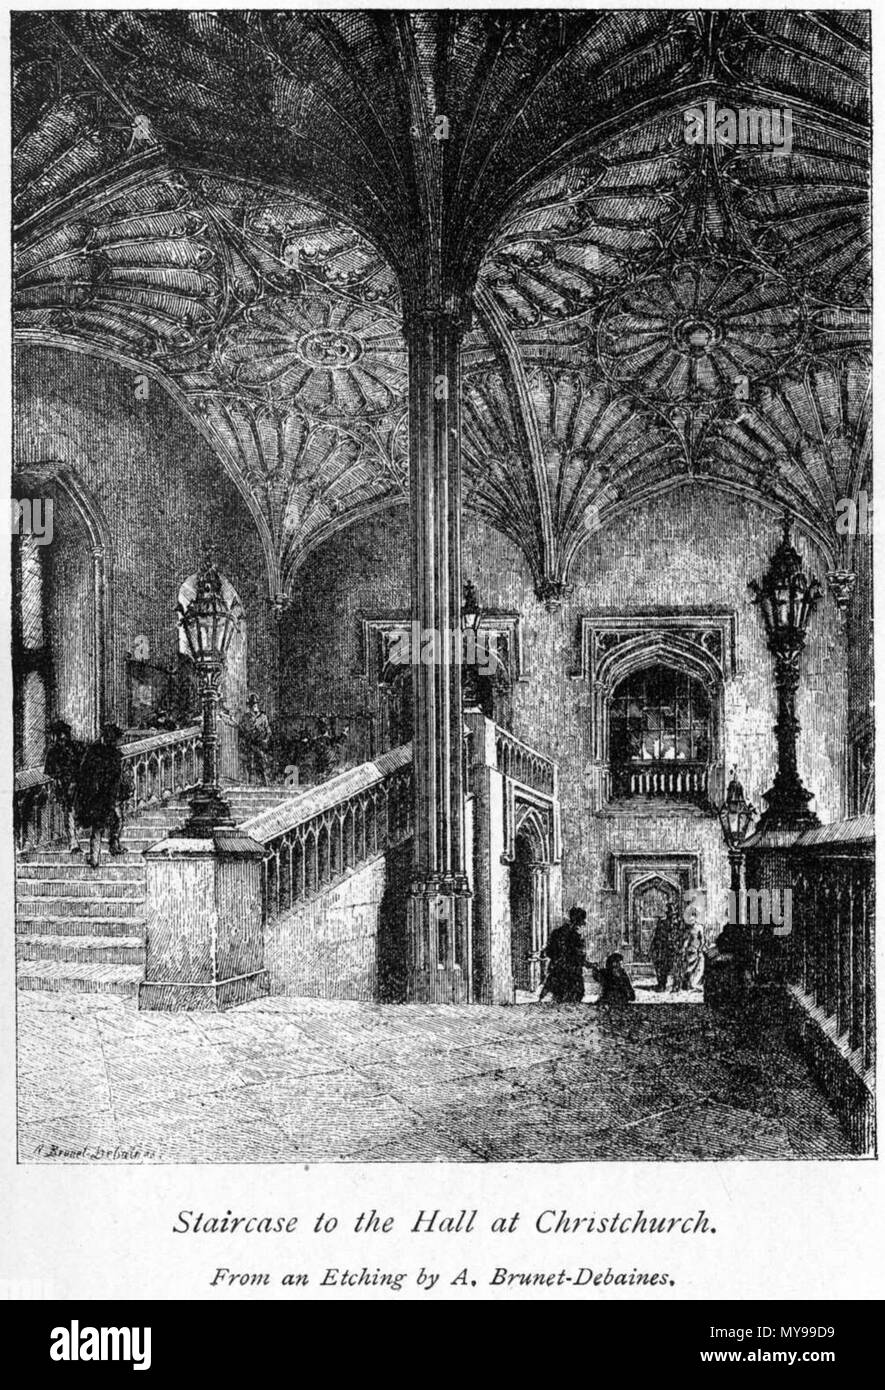 . English: Staircase to the hall at Christchurch - Oxford: Brief Historical and Descriptive Notes by Andrew Lang, M.A., sometime Fellow of Merton College, Oxford [1844 – 1912]; sixth edition, Seely & Co. Ltd., London, 1896. 1896. Alfred-Louis Brunet-Debaines (1845-1939) 33 Alfred-Louis Brunet-Debaines06 Stock Photo